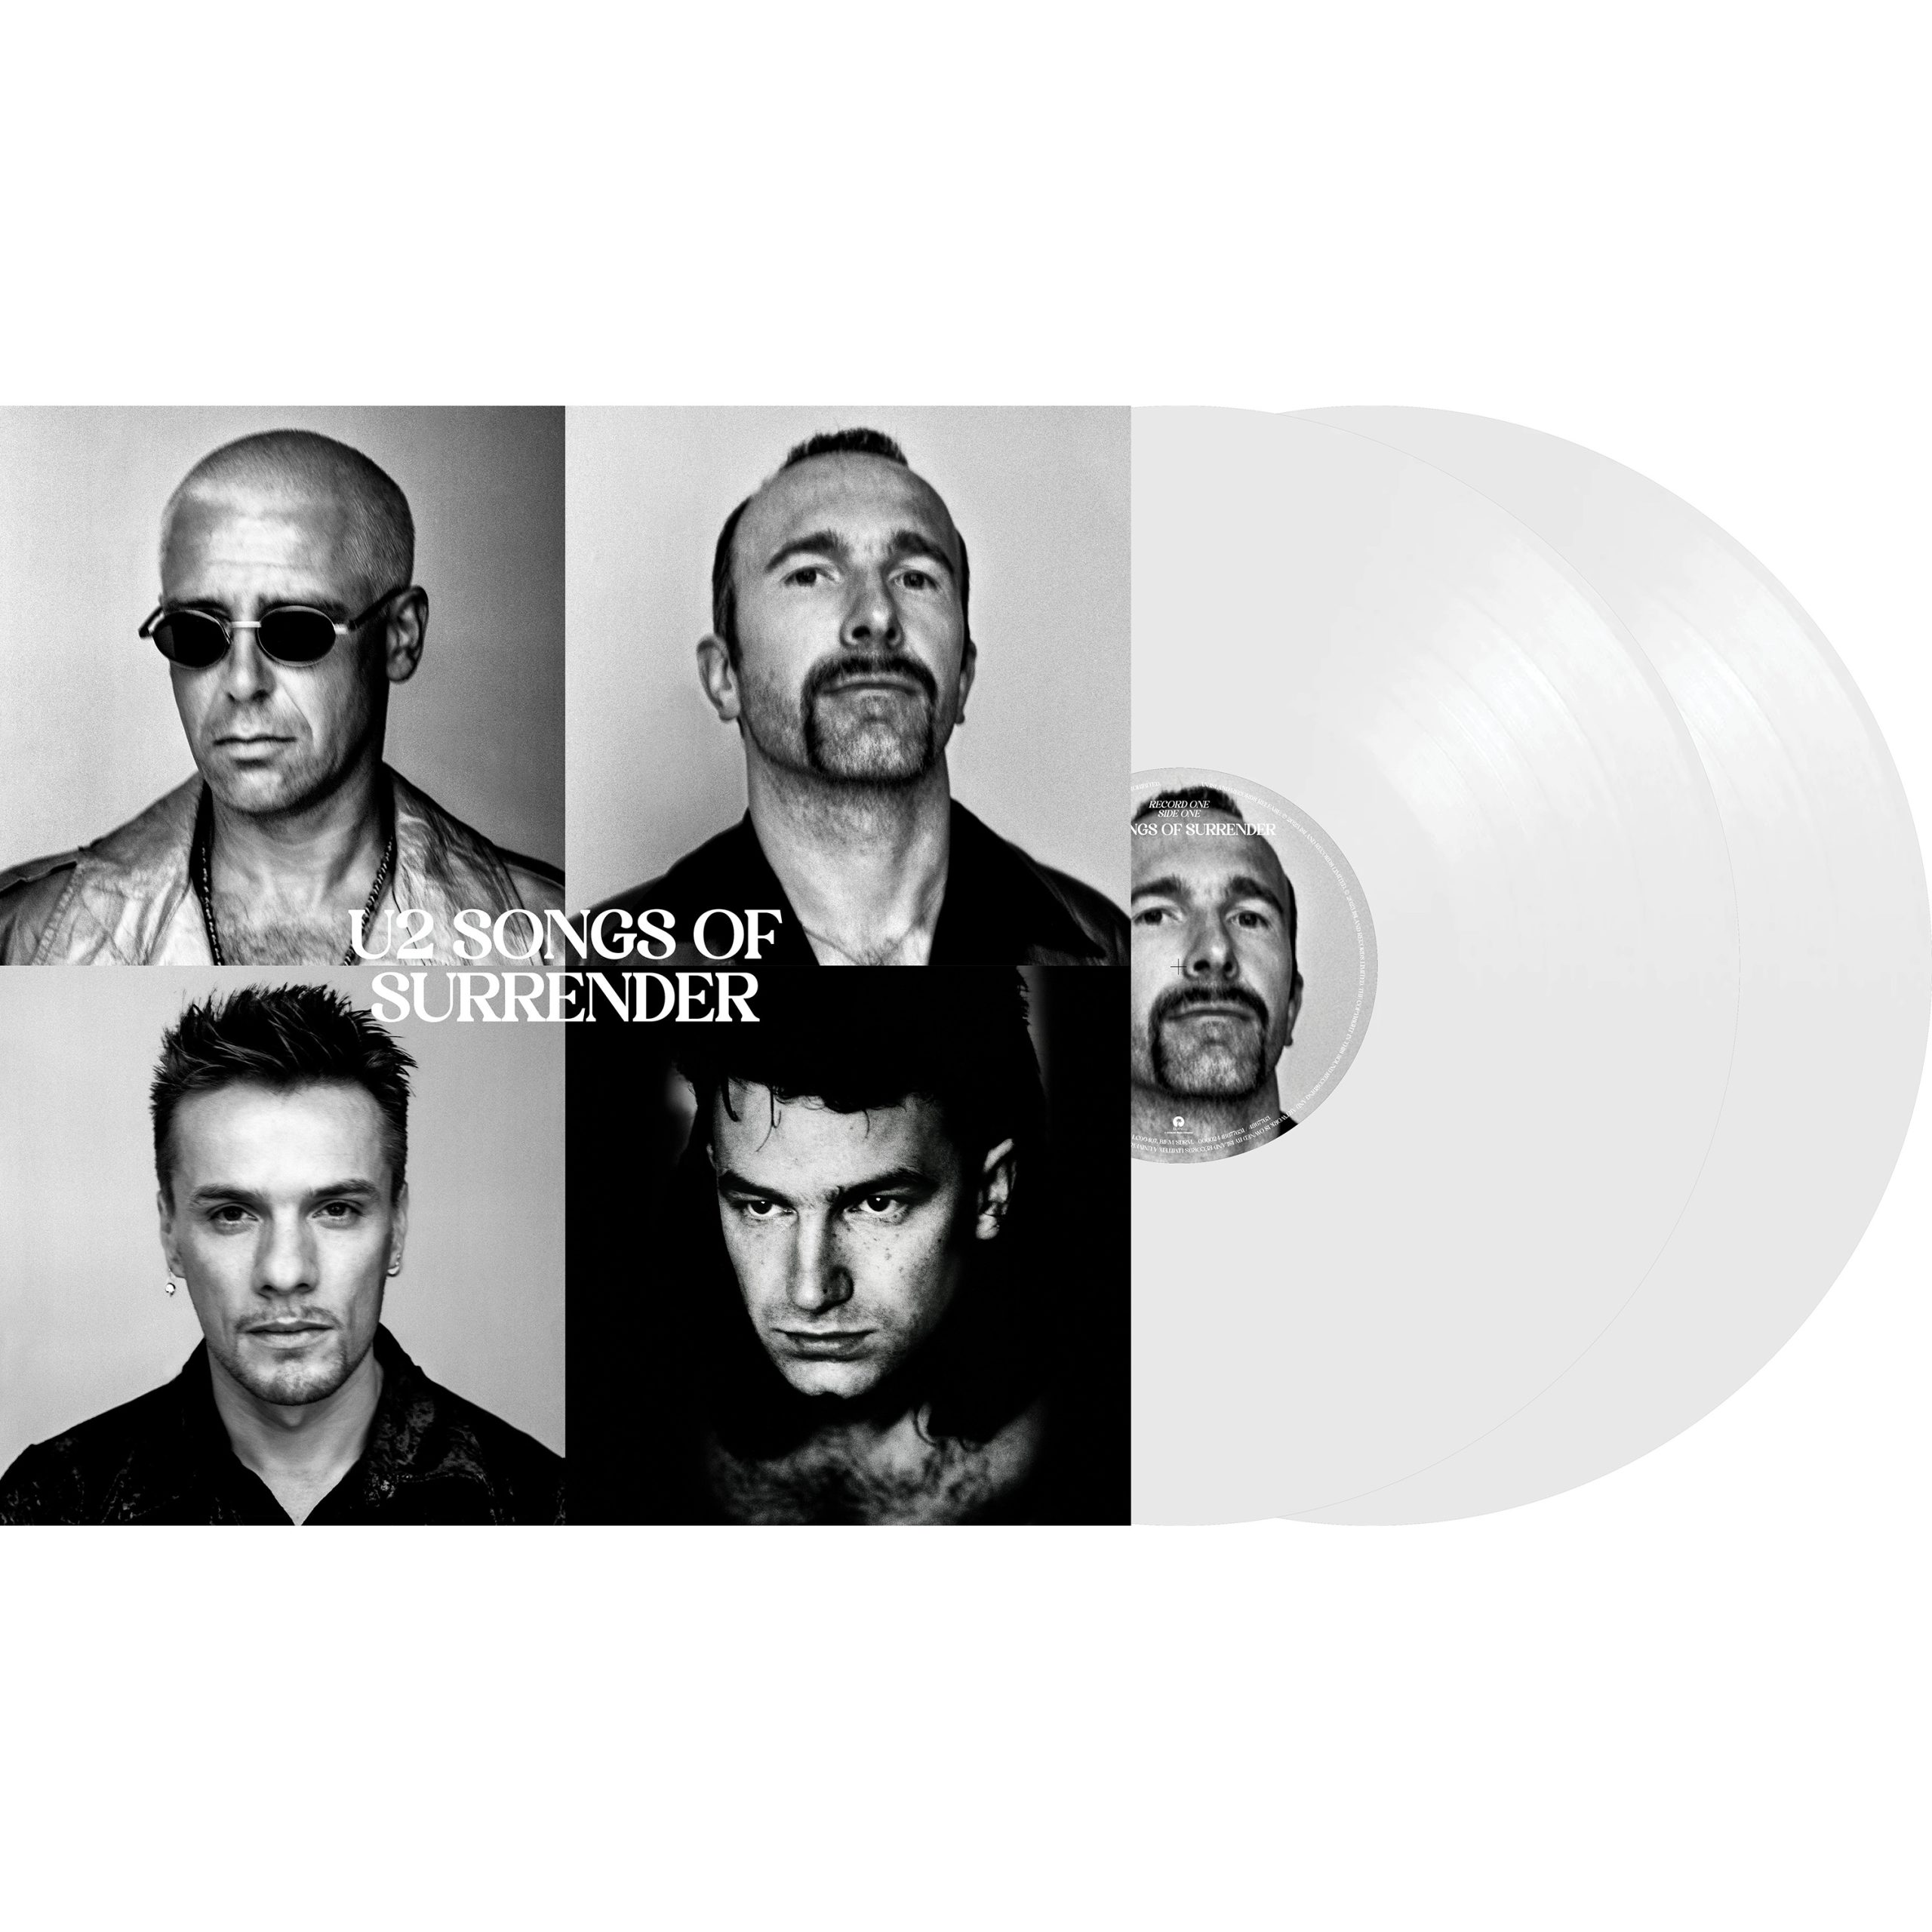 U2 - Songs Of Surrender (Limited Edition White Vinyl)